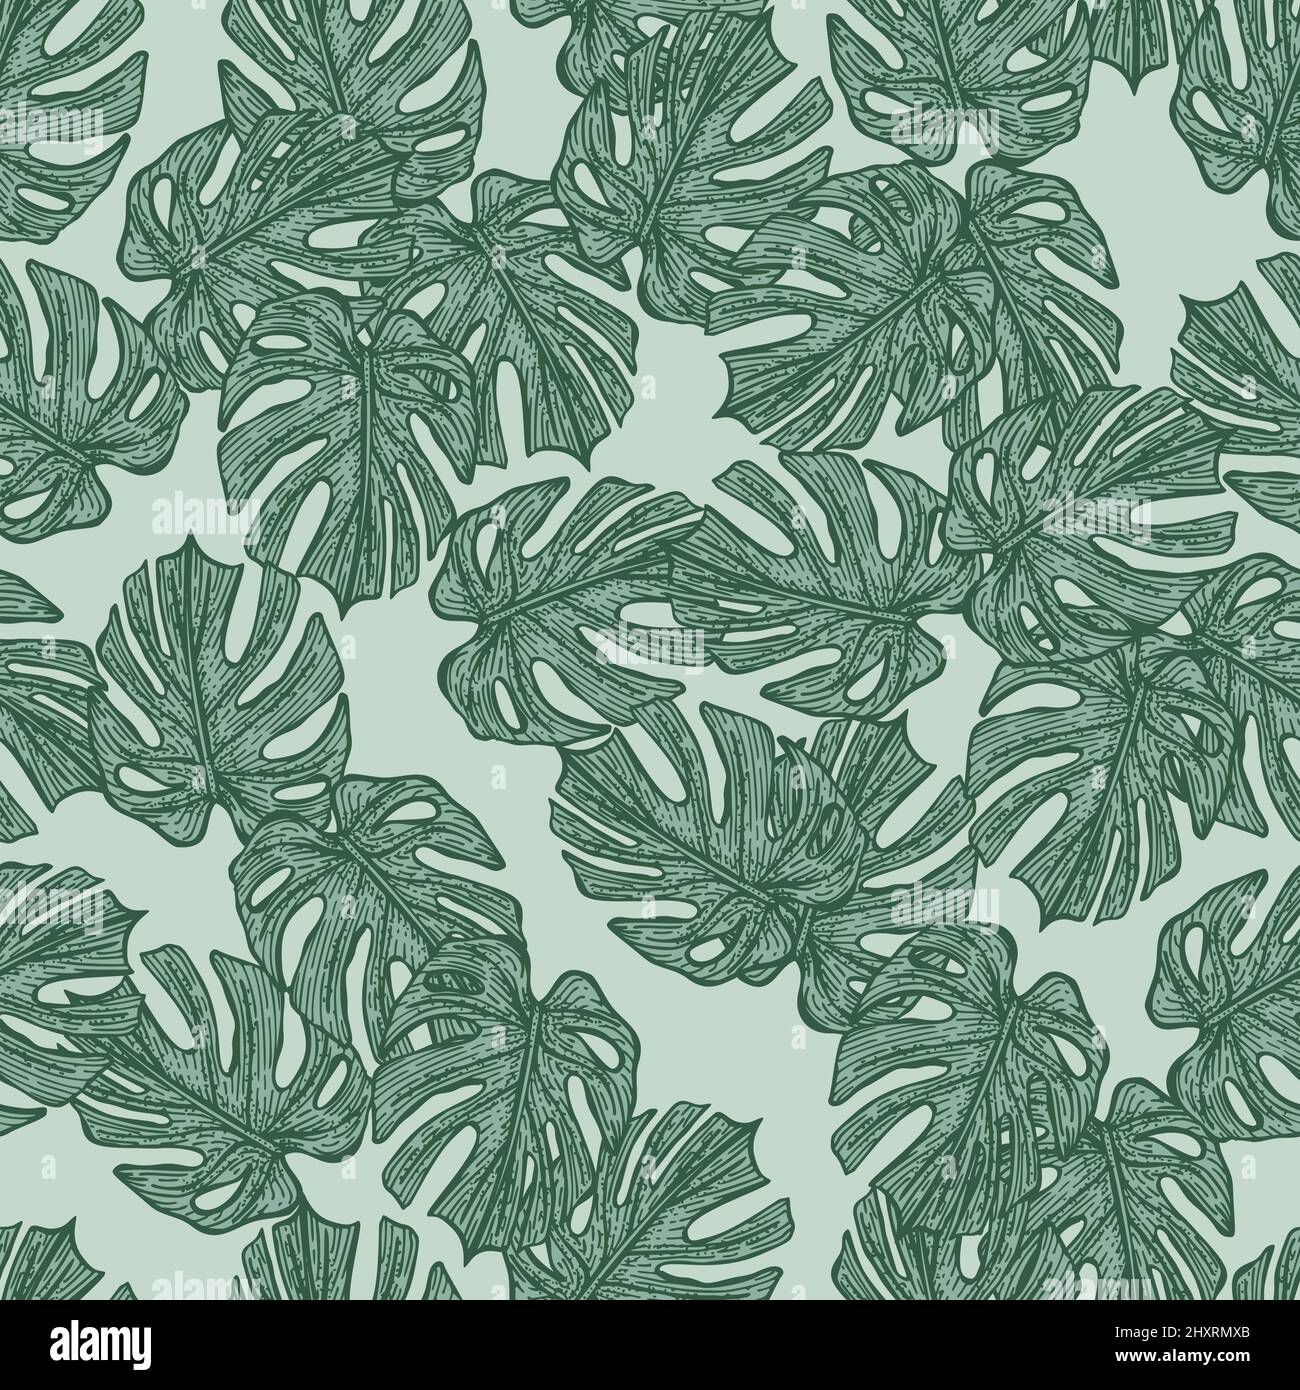 Engraving leaf monstera seamless pattern. Vintage leaves background. Repeated texture in hand drawn style for fabric, wrapping paper, wallpaper, tissu Stock Vector